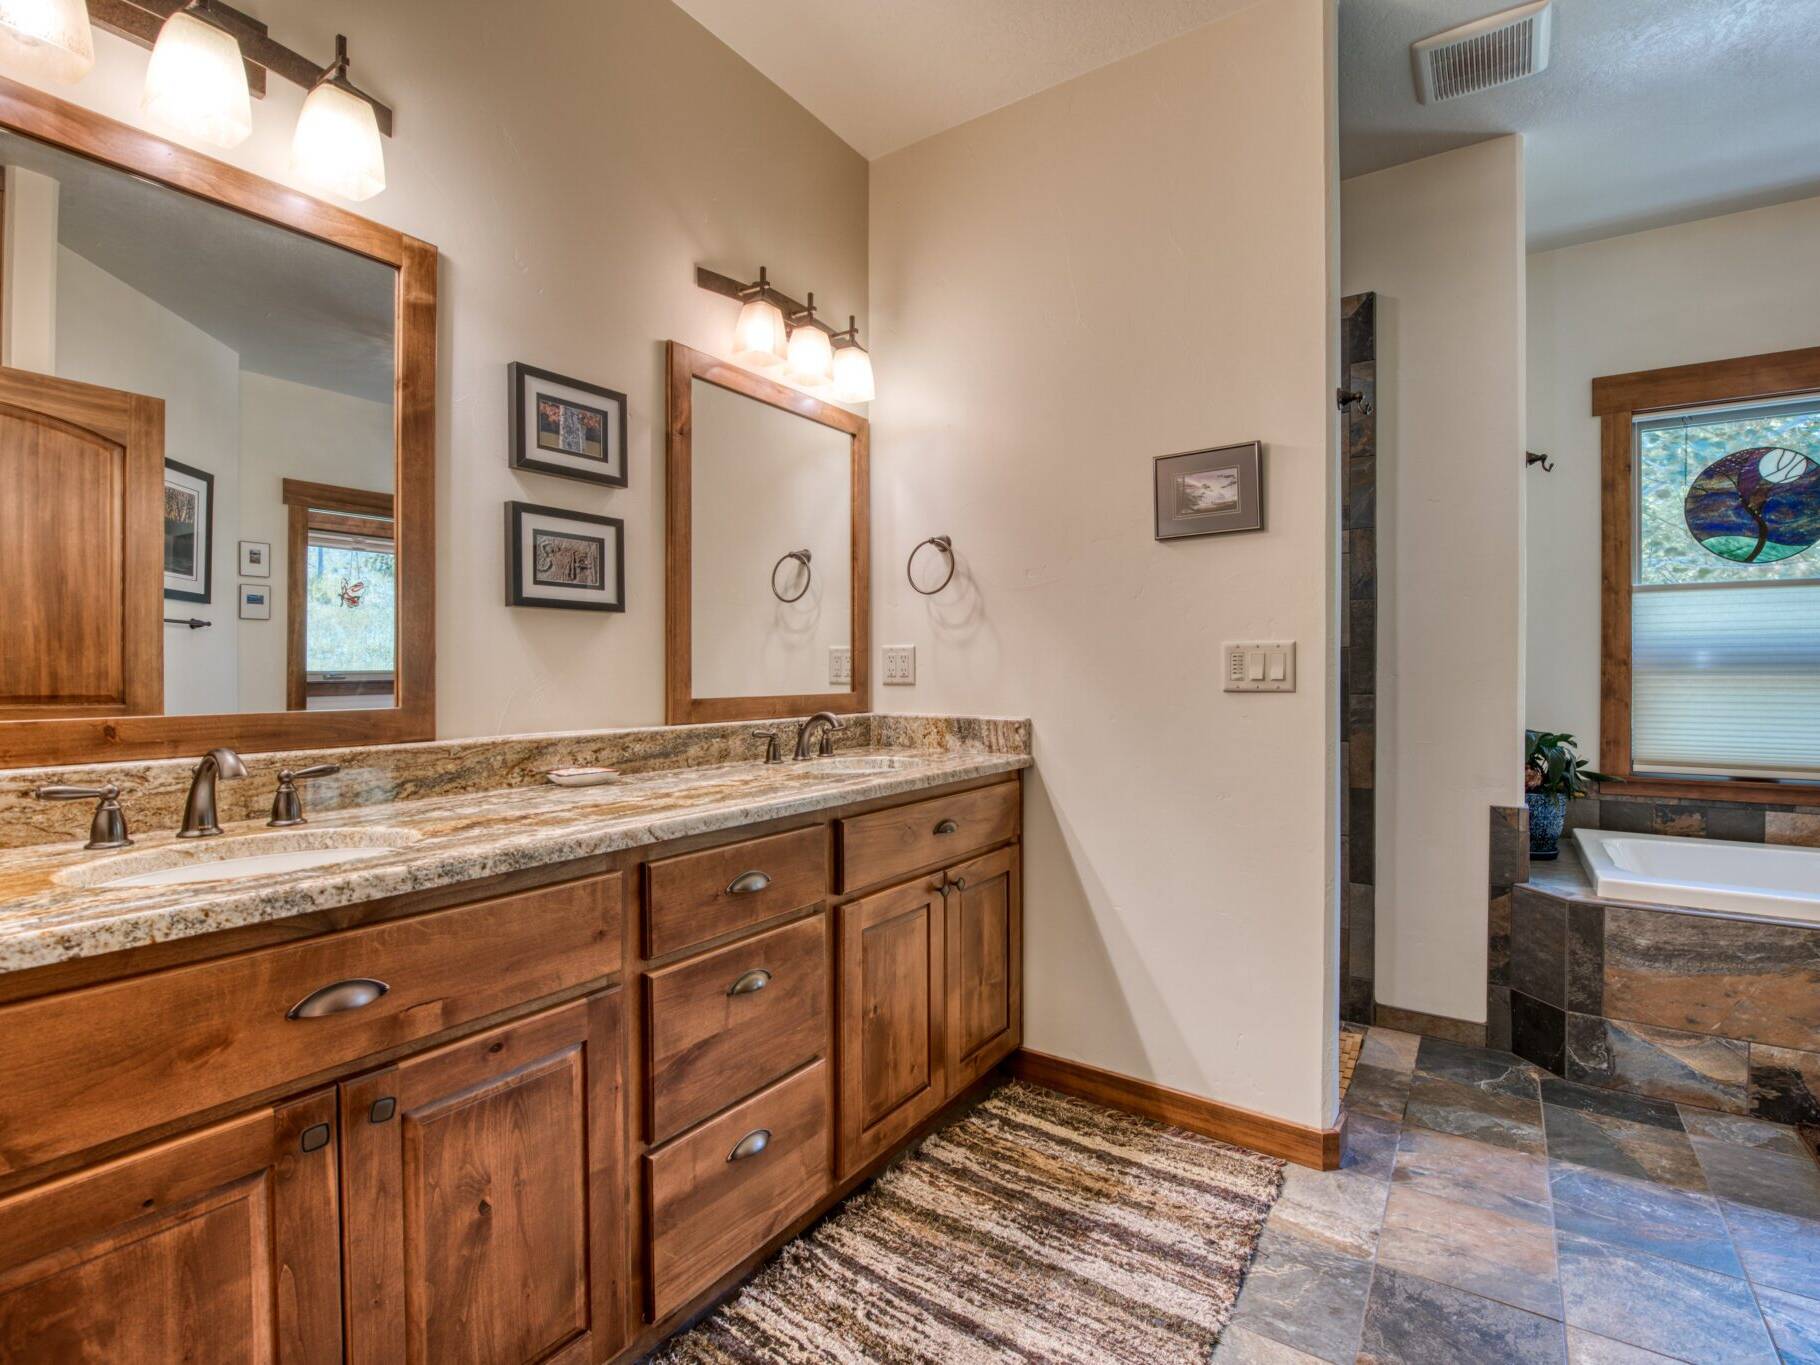 Master bathroom with tile floors, granite countertops, and a soaking tub set in a tiled tub deck with a large window in a custom home near Hamilton, MT